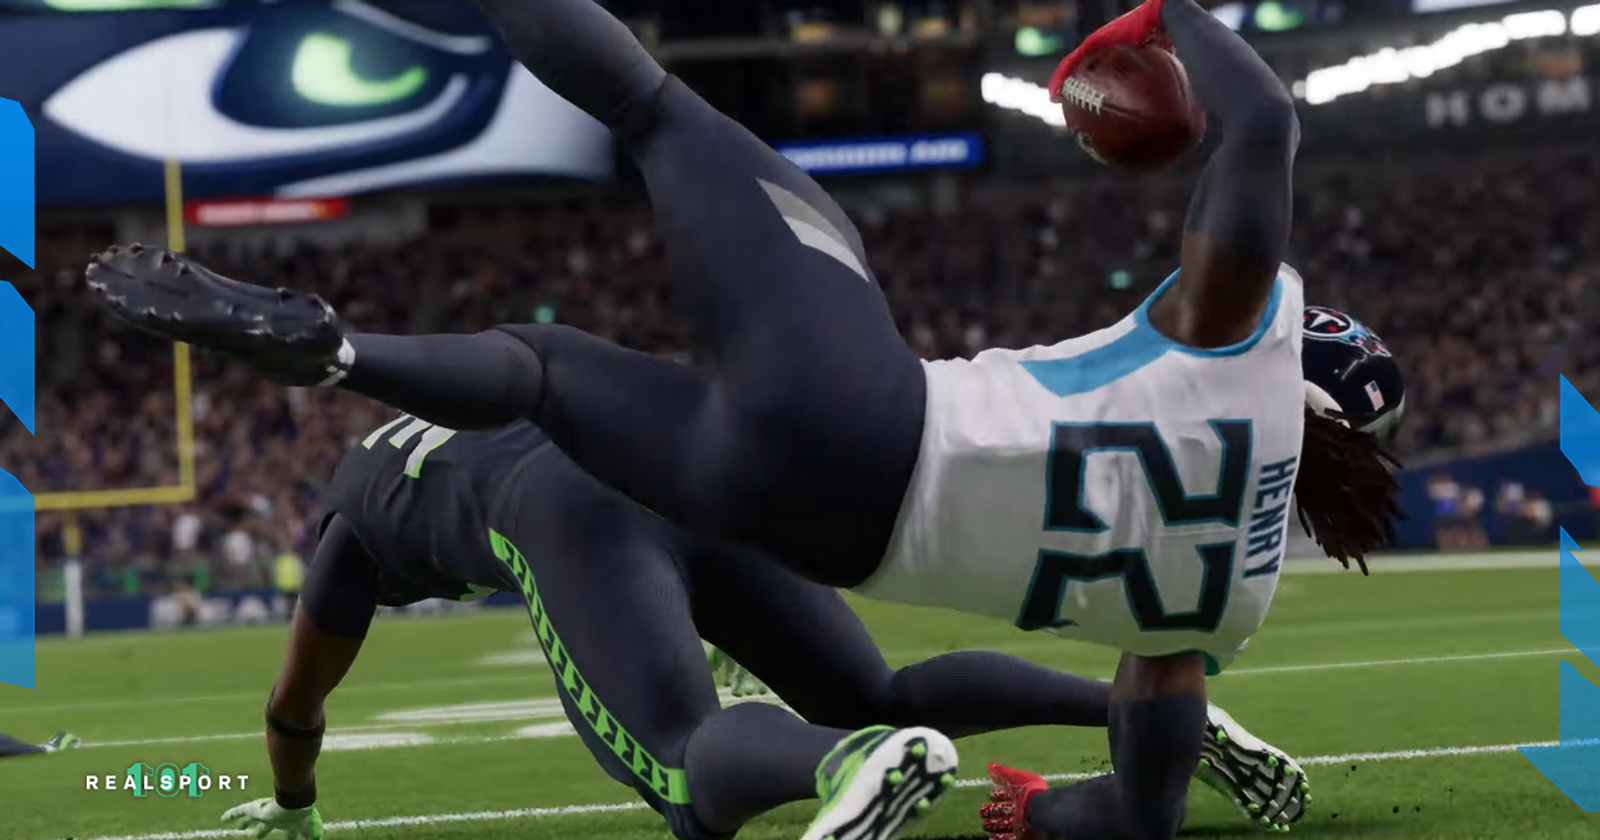 Is Madden 22 Coming to Nintendo Switch? Answered